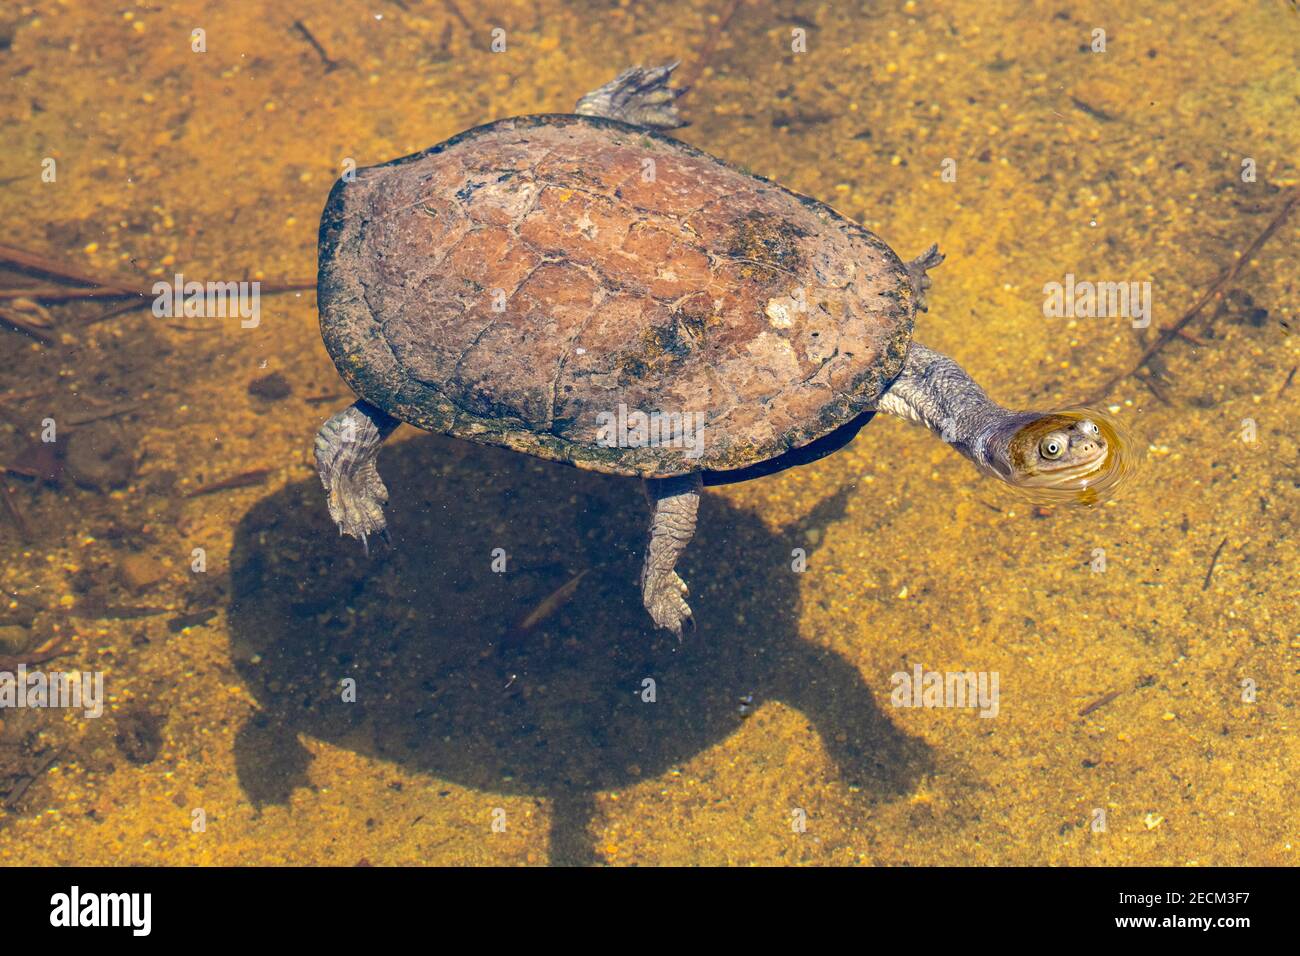 Eastern Long-necked Turtle breathing at water surface Stock Photo